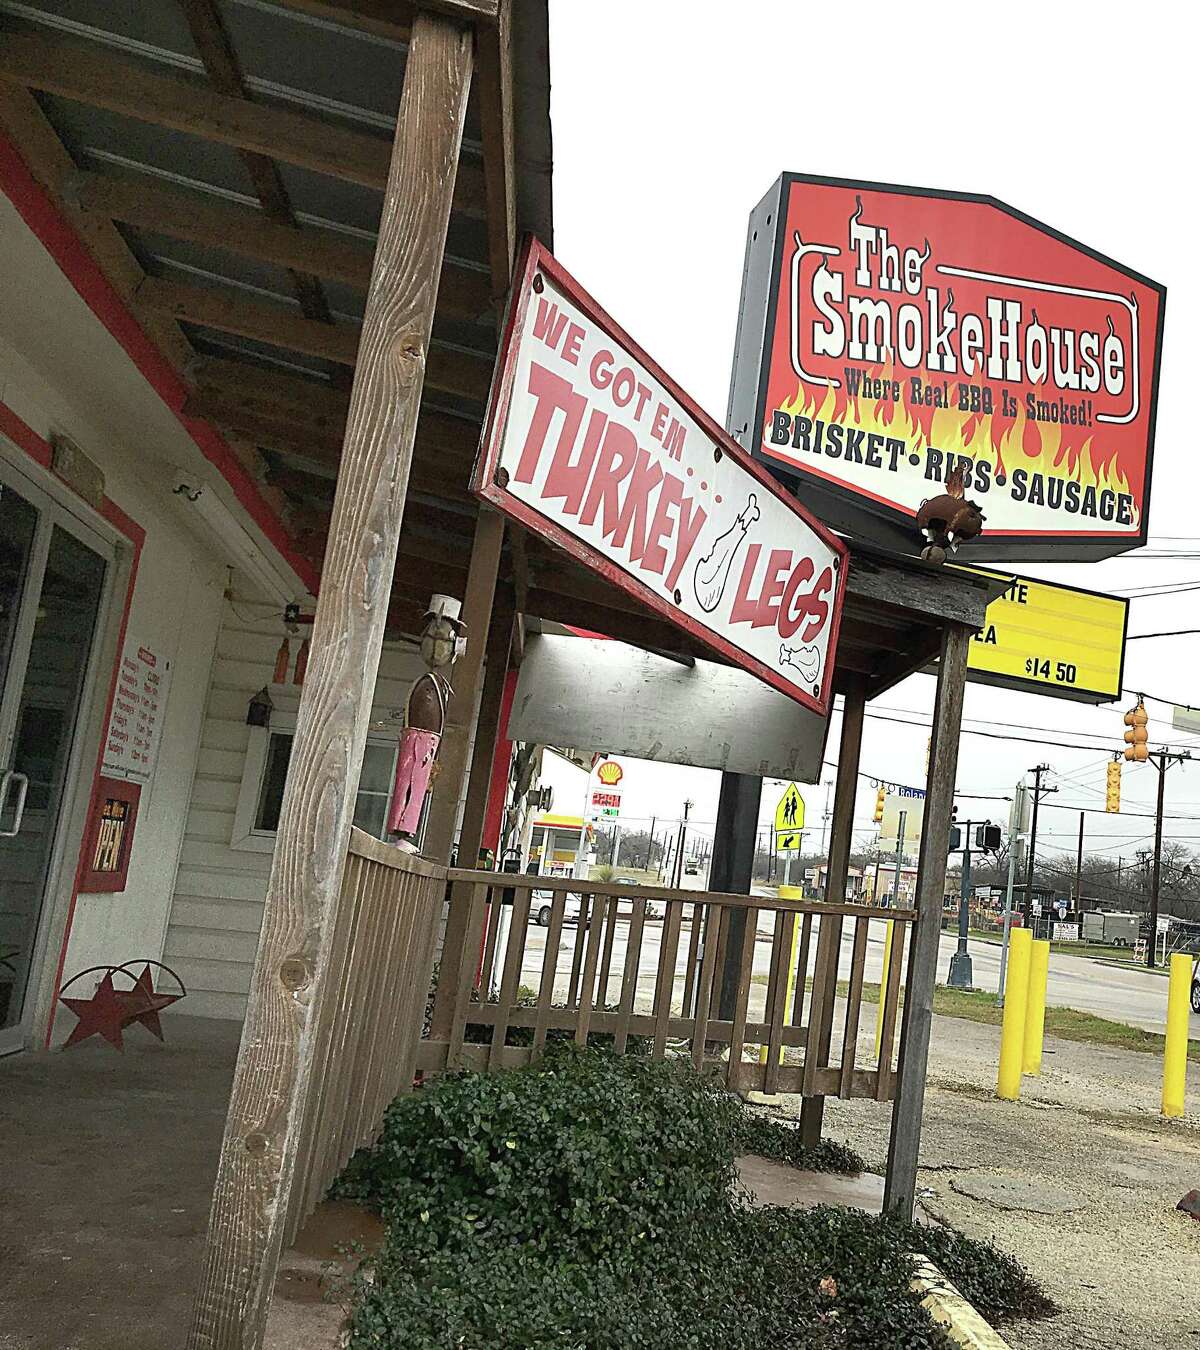 The Smokehouse barbecue restaurant on Roland Road.